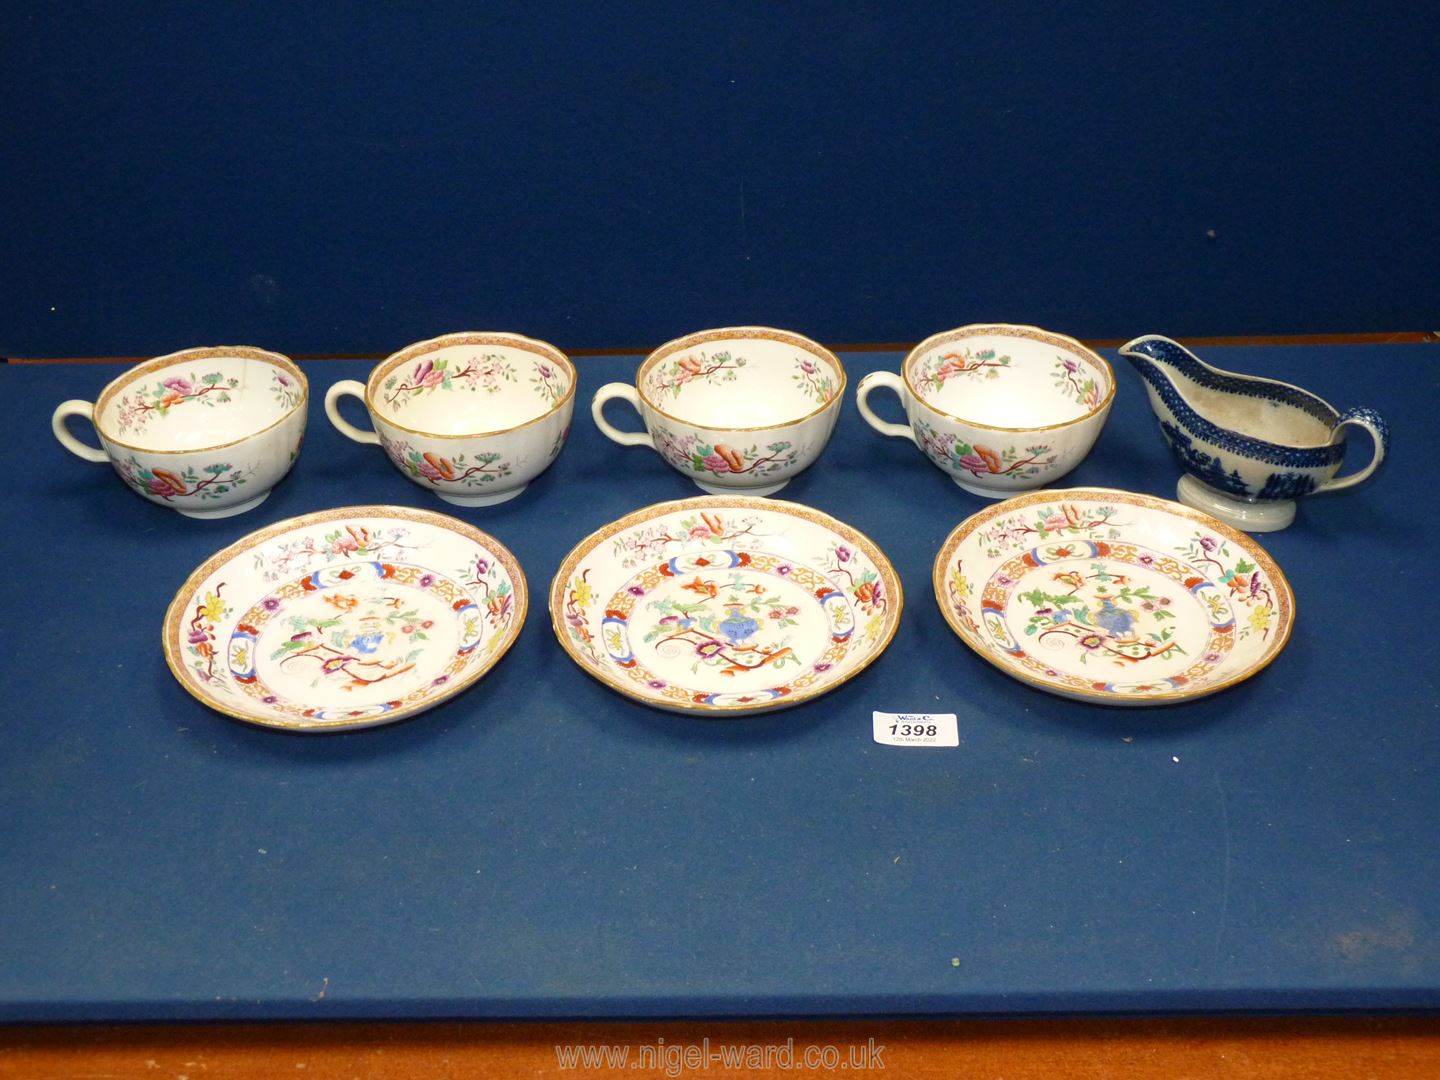 Miscellaneous 19th c. breakfast cups and saucers and a blue and white sauce boat.